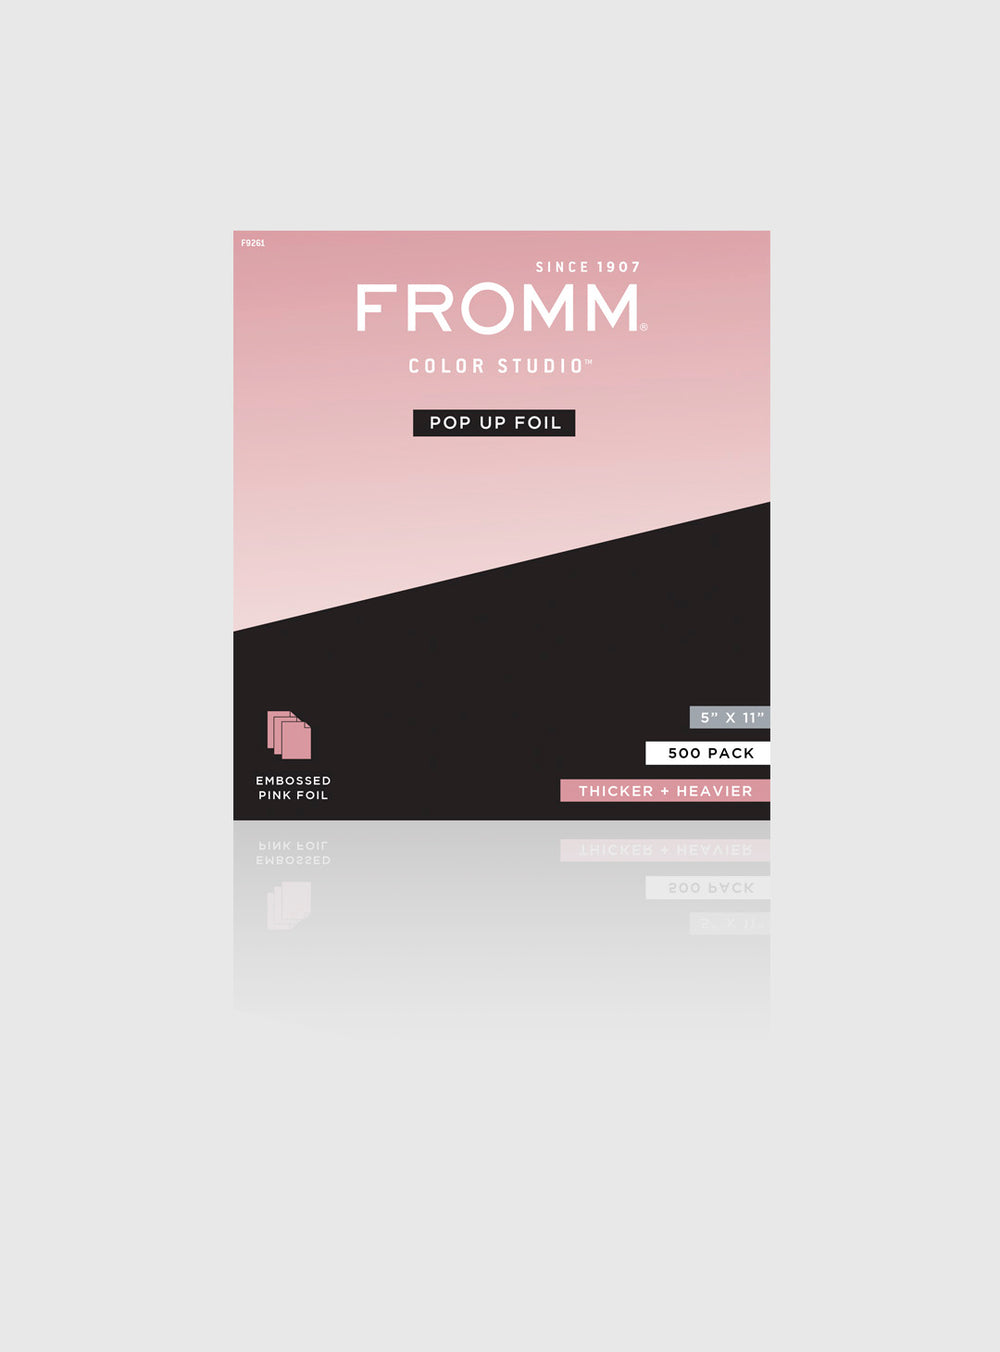 Fromm Pro 5"x11" Embossed Pop Up Foil Pink - 500 Pack